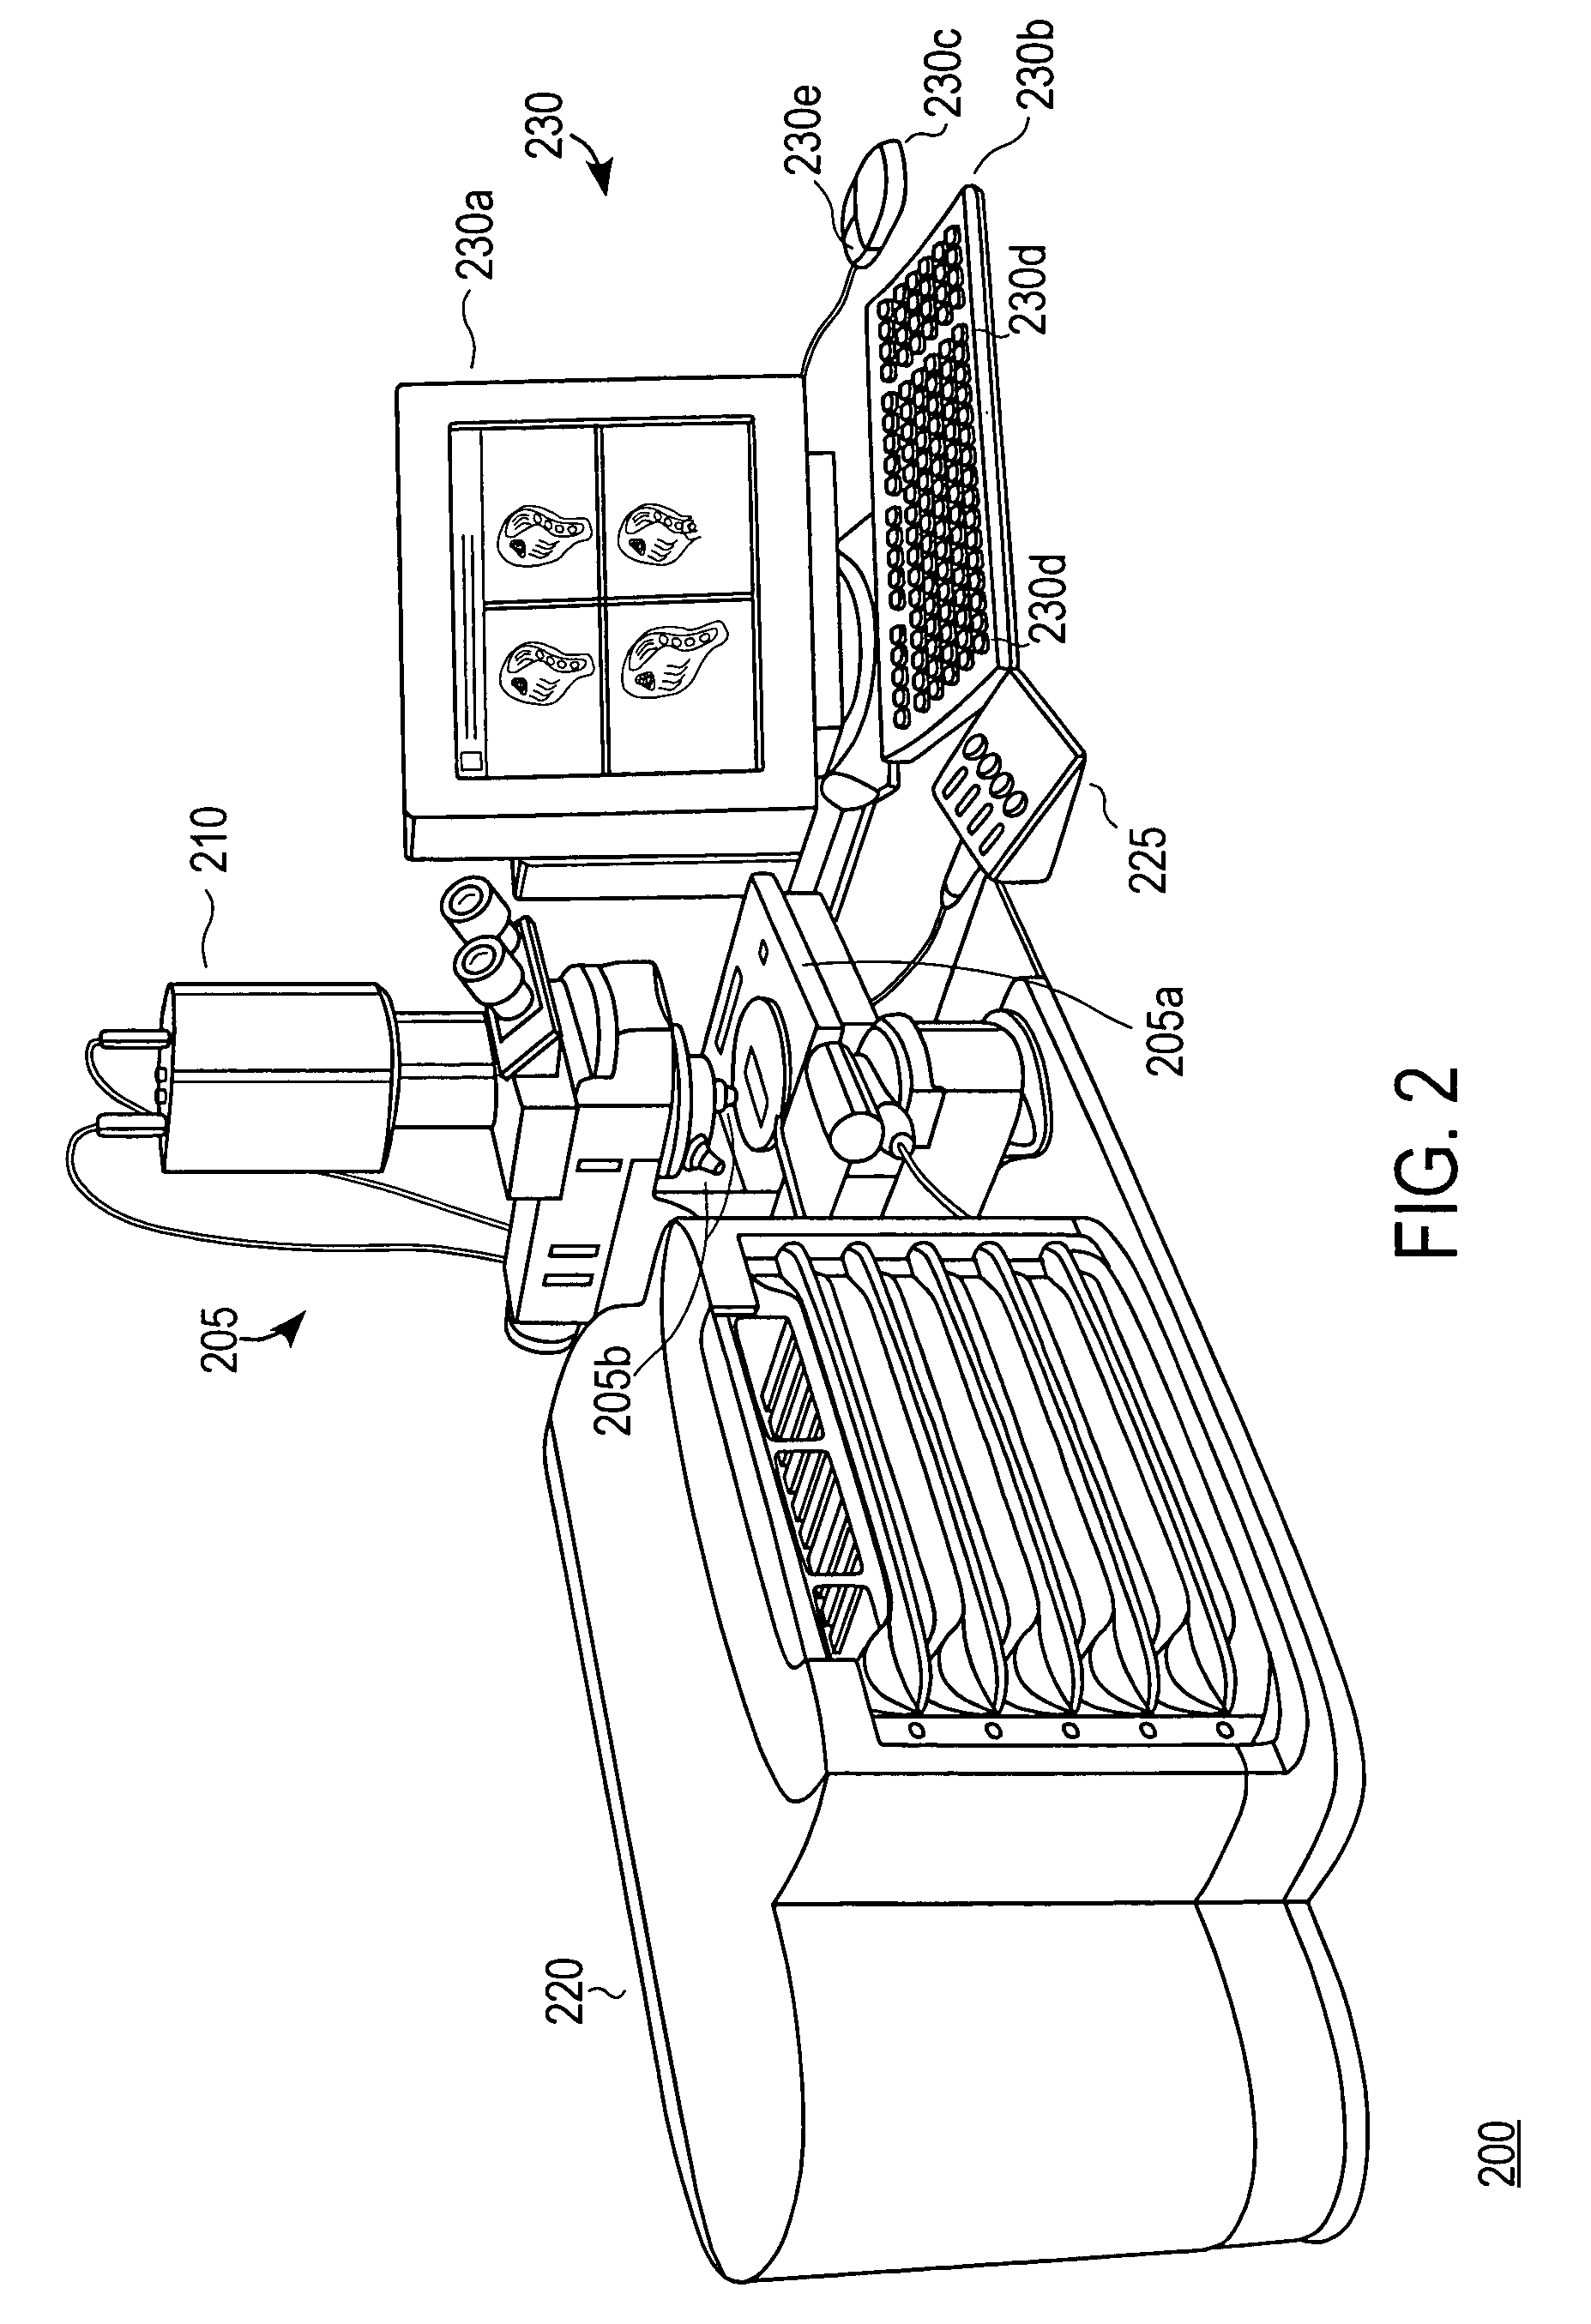 Linking of images to enable simultaneous viewing of multiple objects